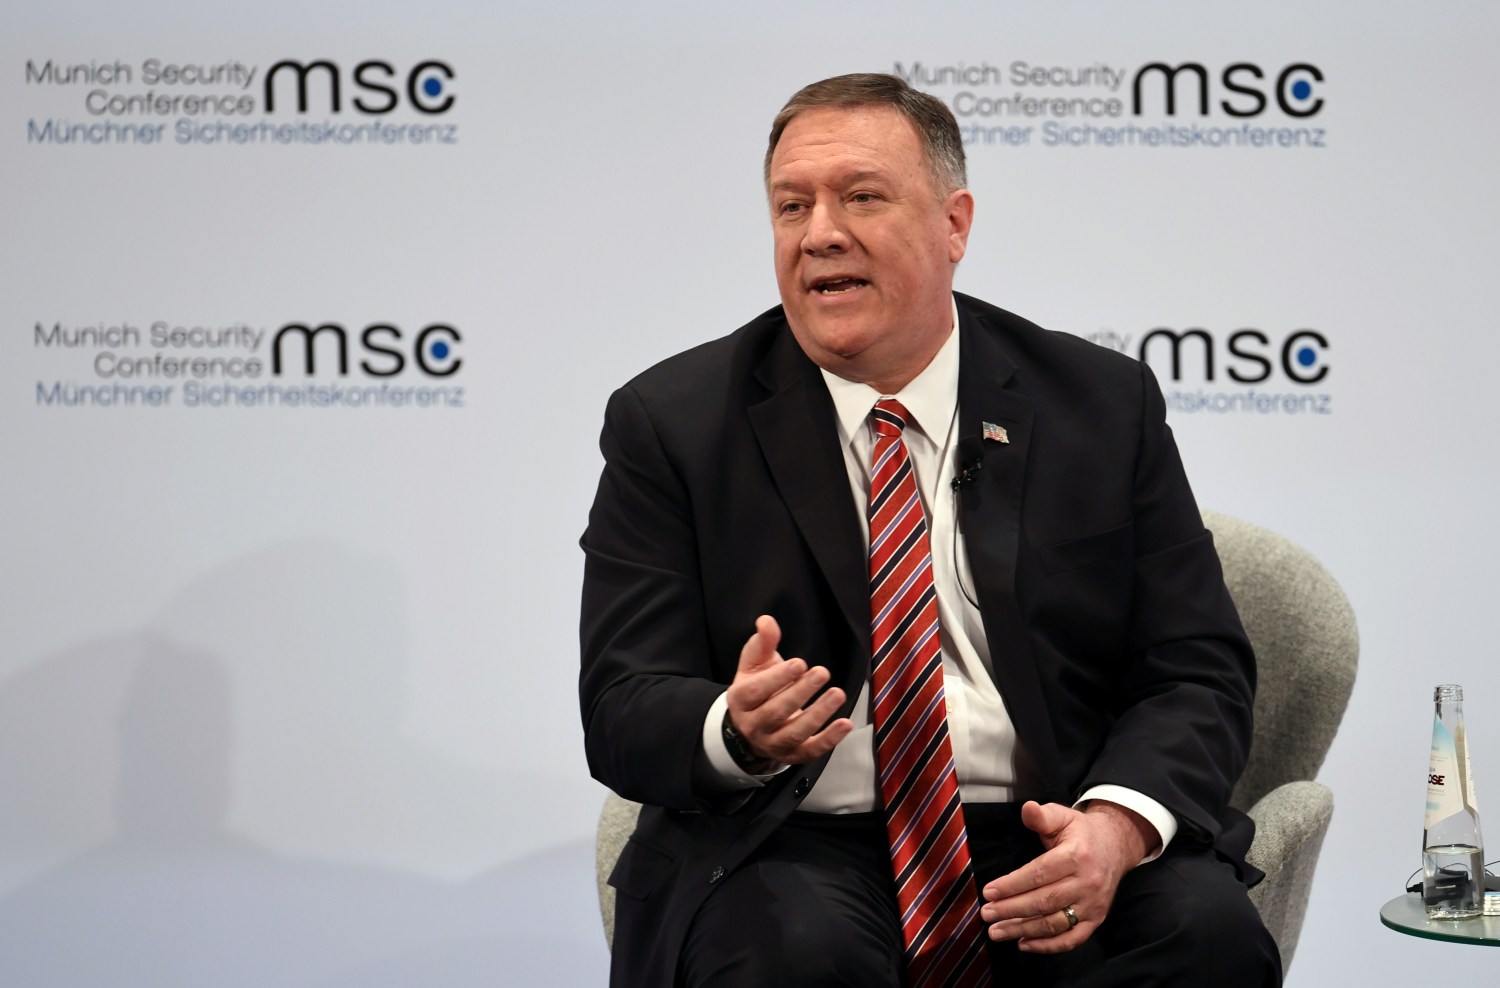 U.S. Secretary of State Mike Pompeo speaks during a panel discussion at the annual Munich Security Conference in Germany February 15, 2020. REUTERS/Andreas Gebert